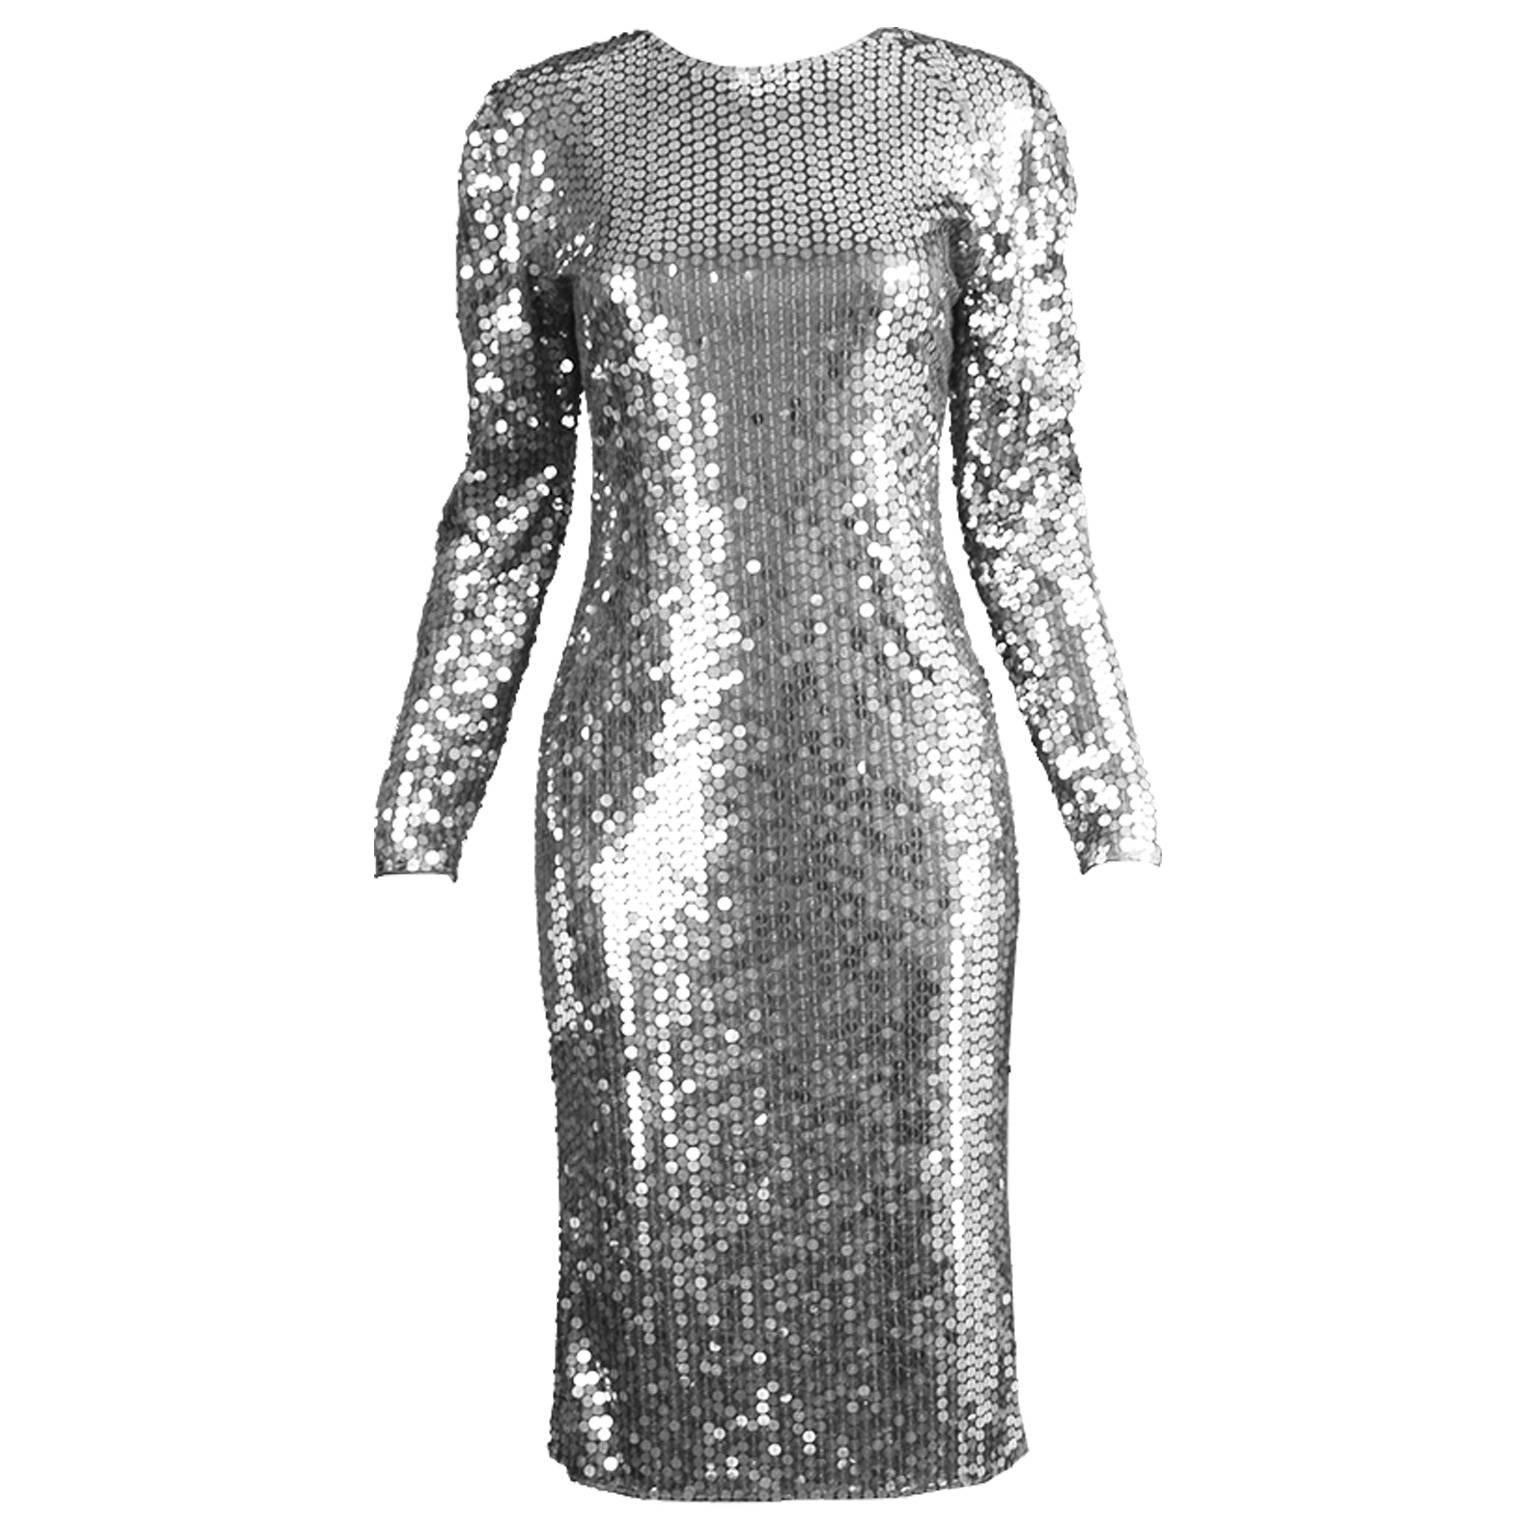 Halston Silver Sequin Dress with Deep Scoop Back, 1970s For Sale